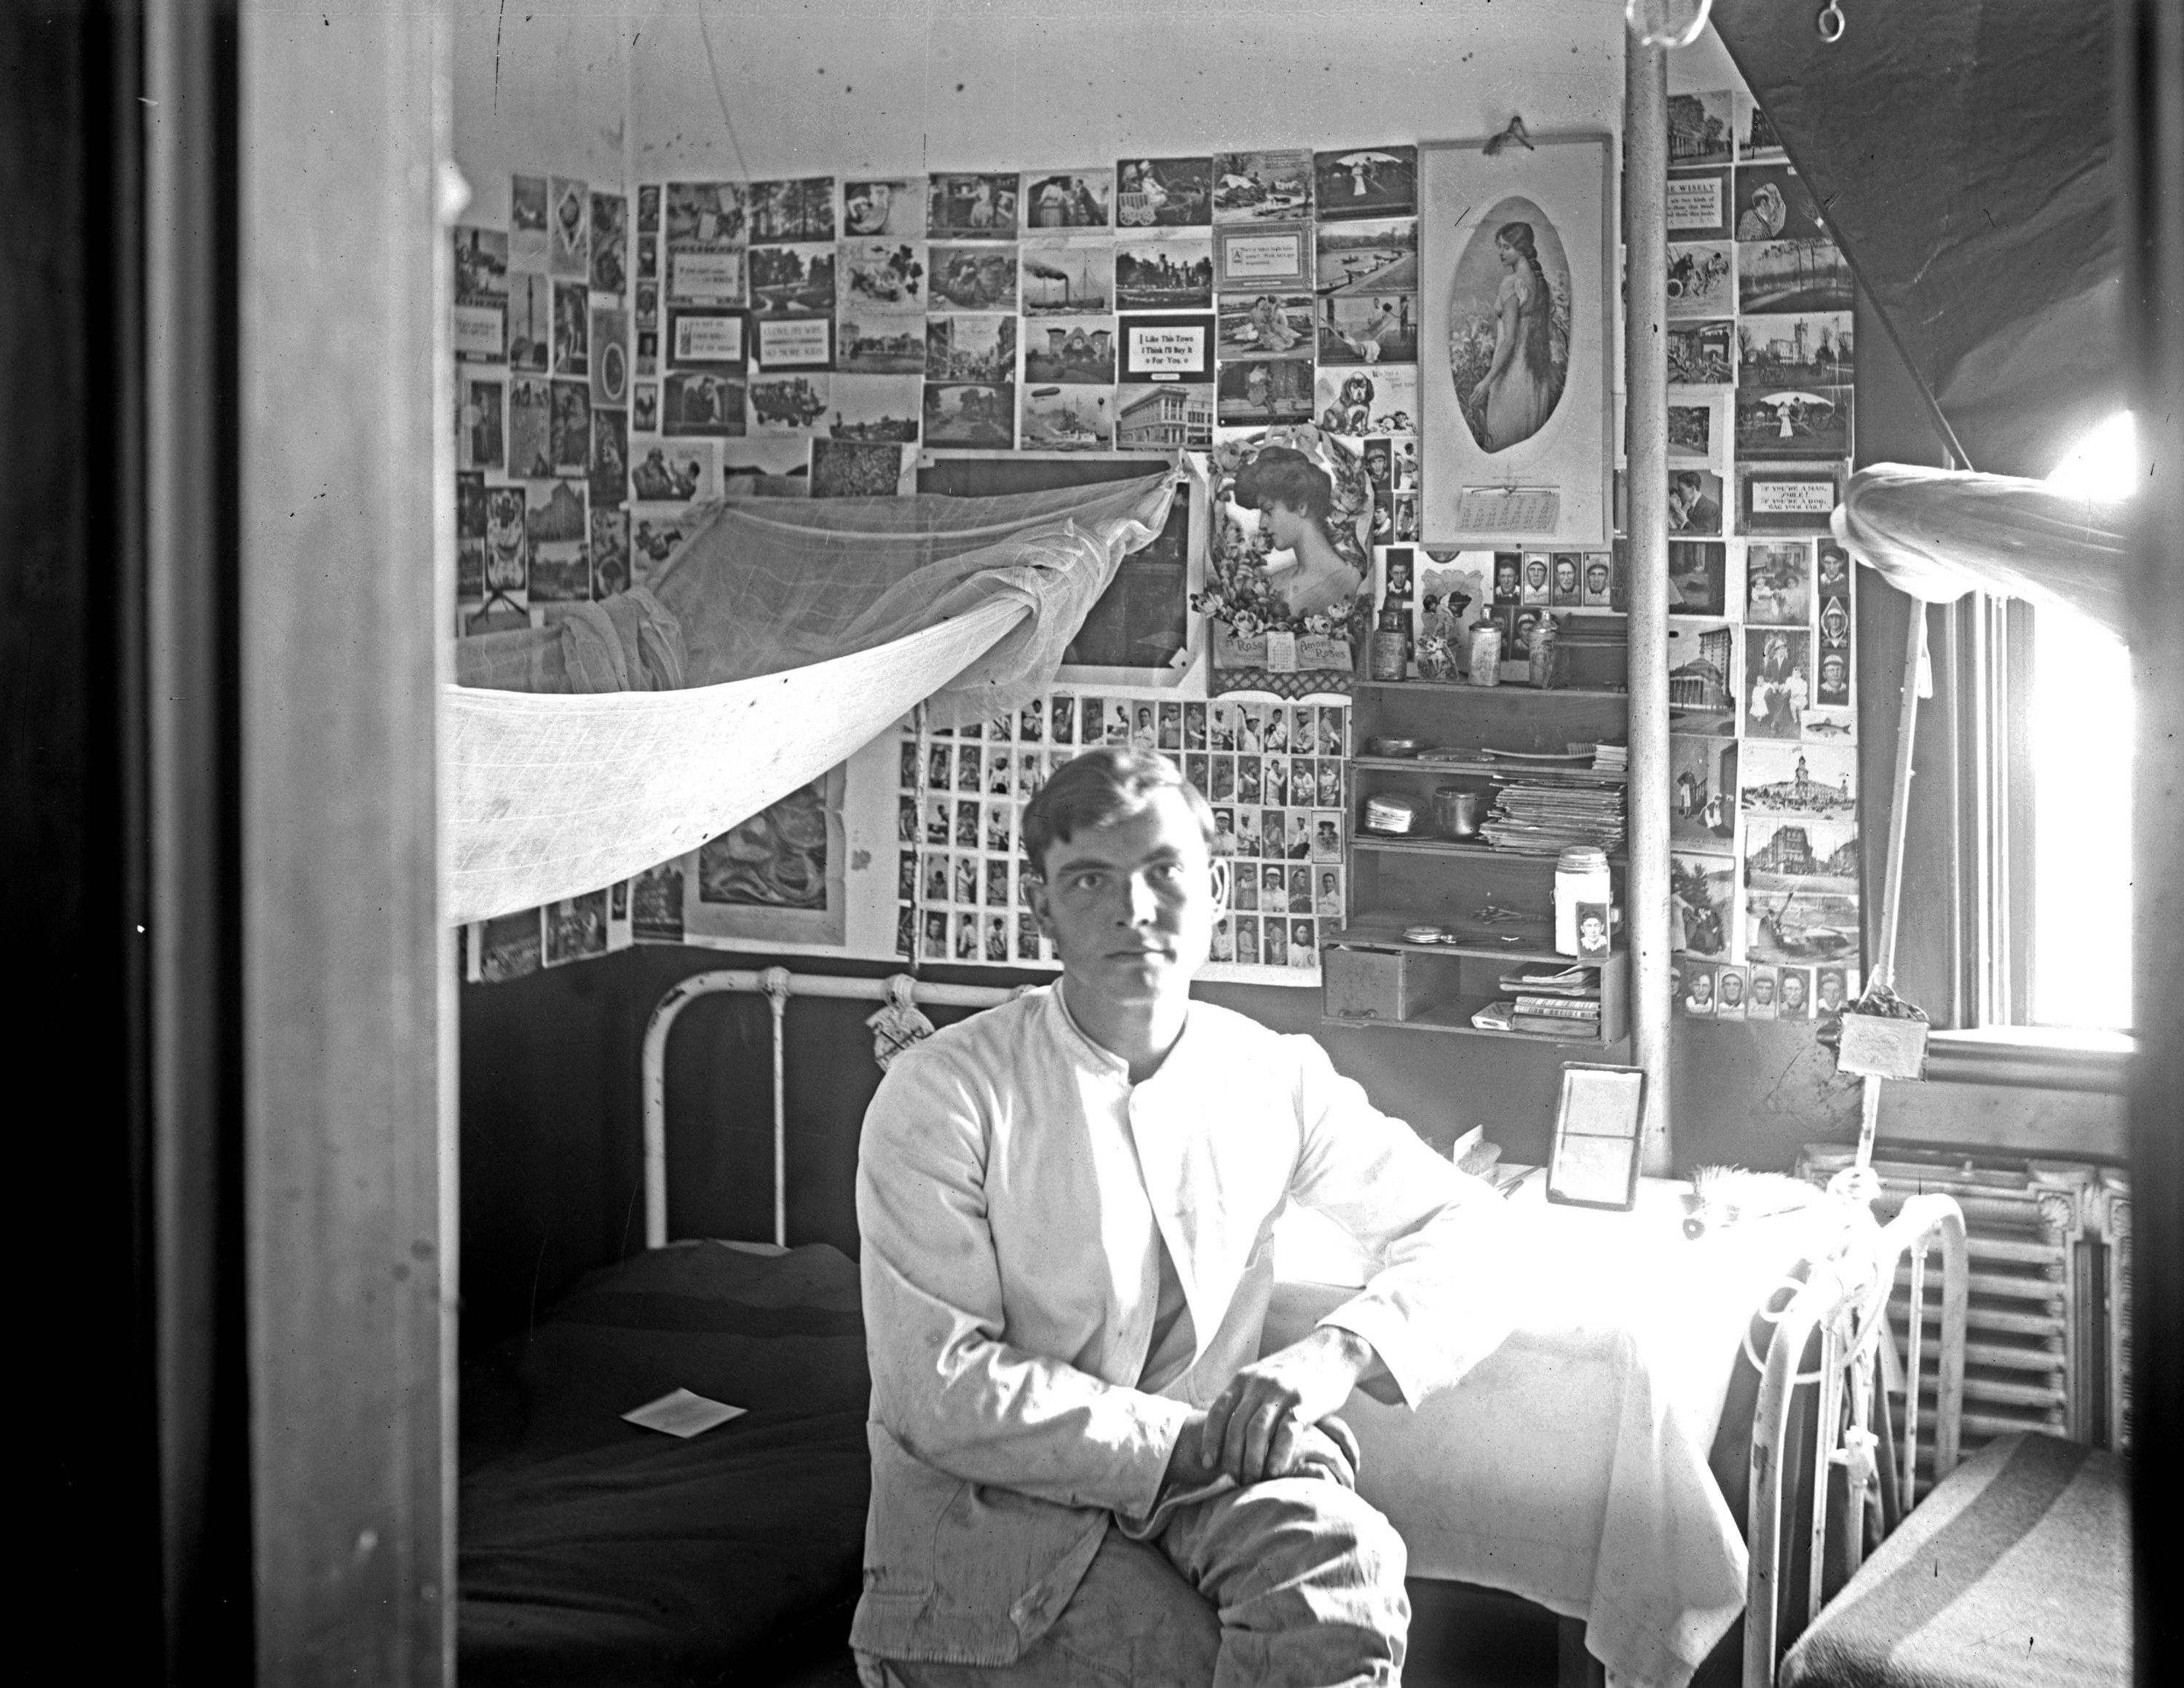 A man in his dorm room